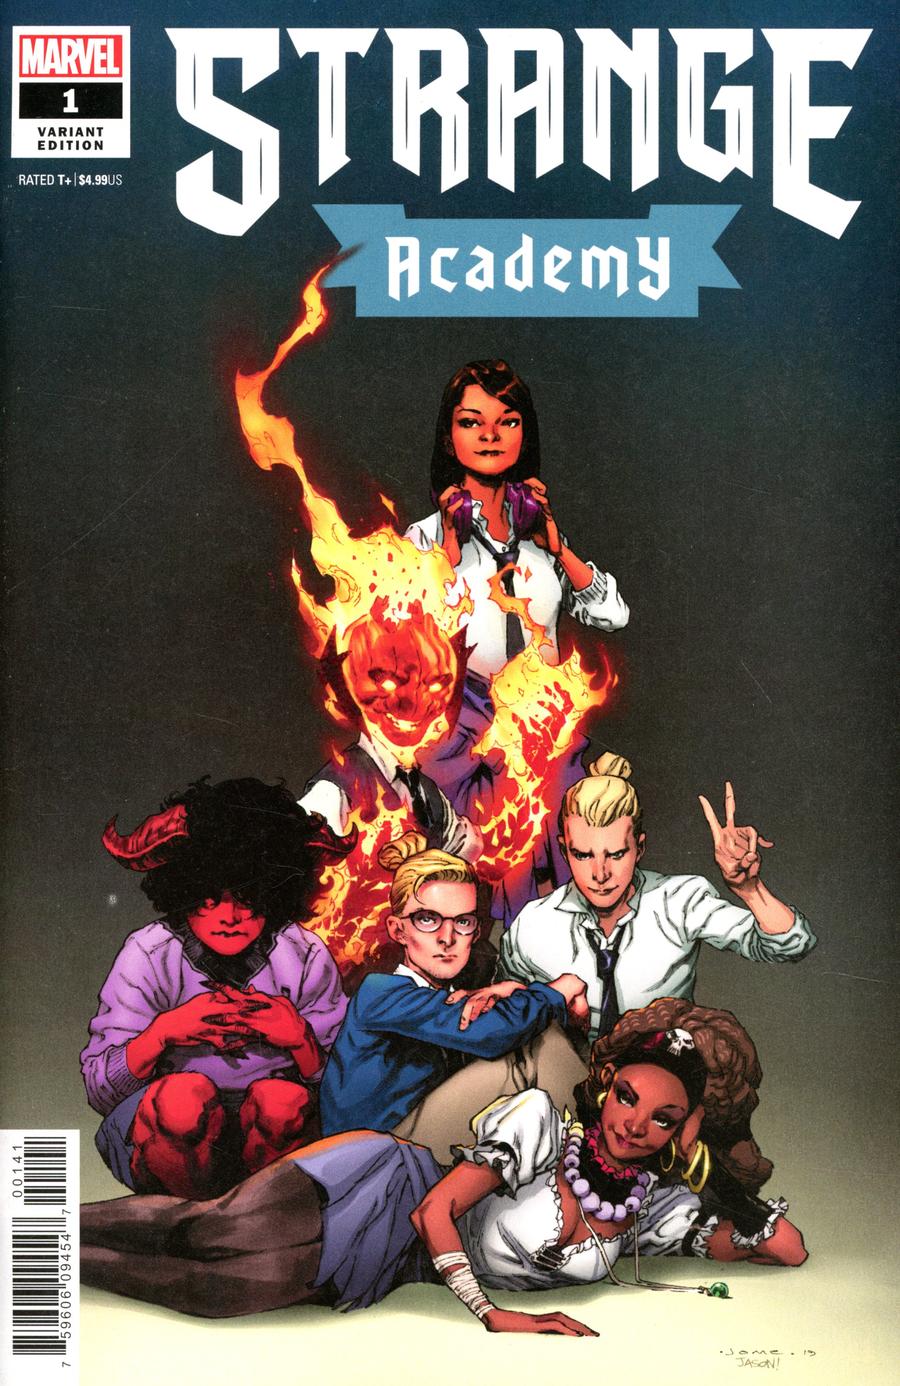 Strange Academy #1 Cover G Incentive Jerome Opena Variant Cover